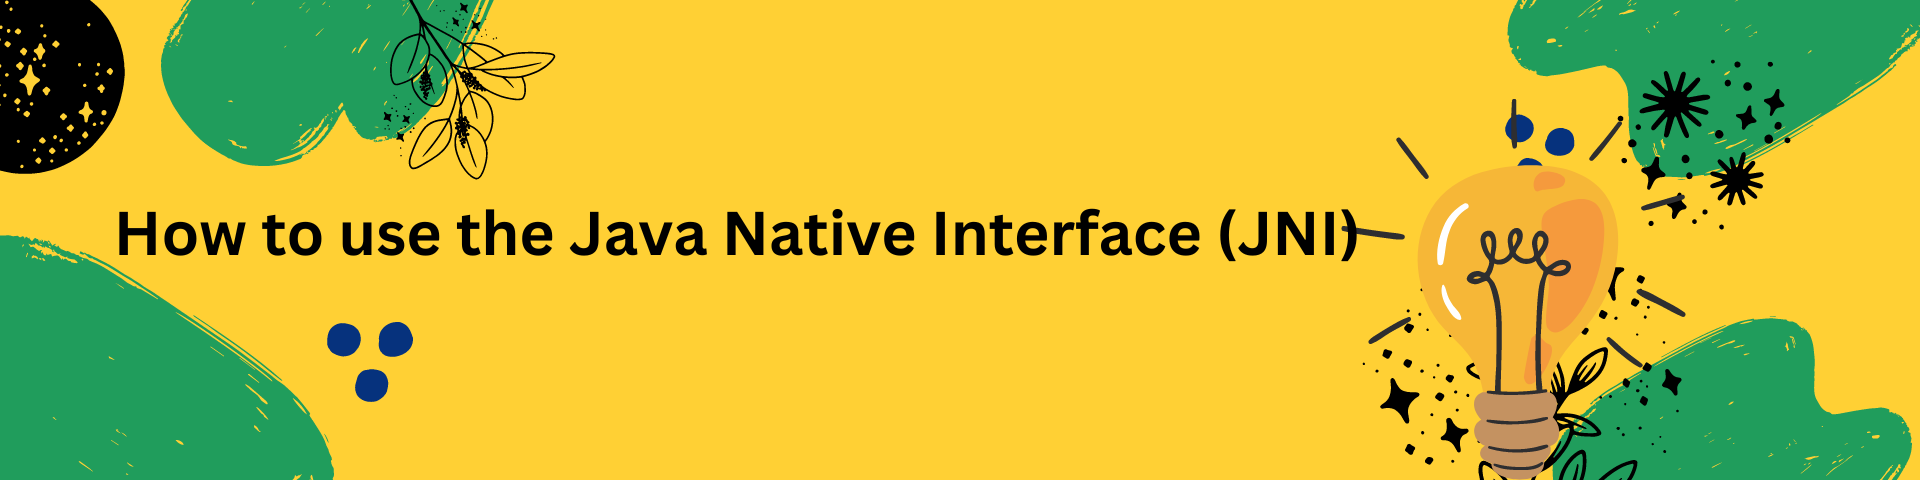 How to use the Java Native Interface (JNI) to call native code from Java